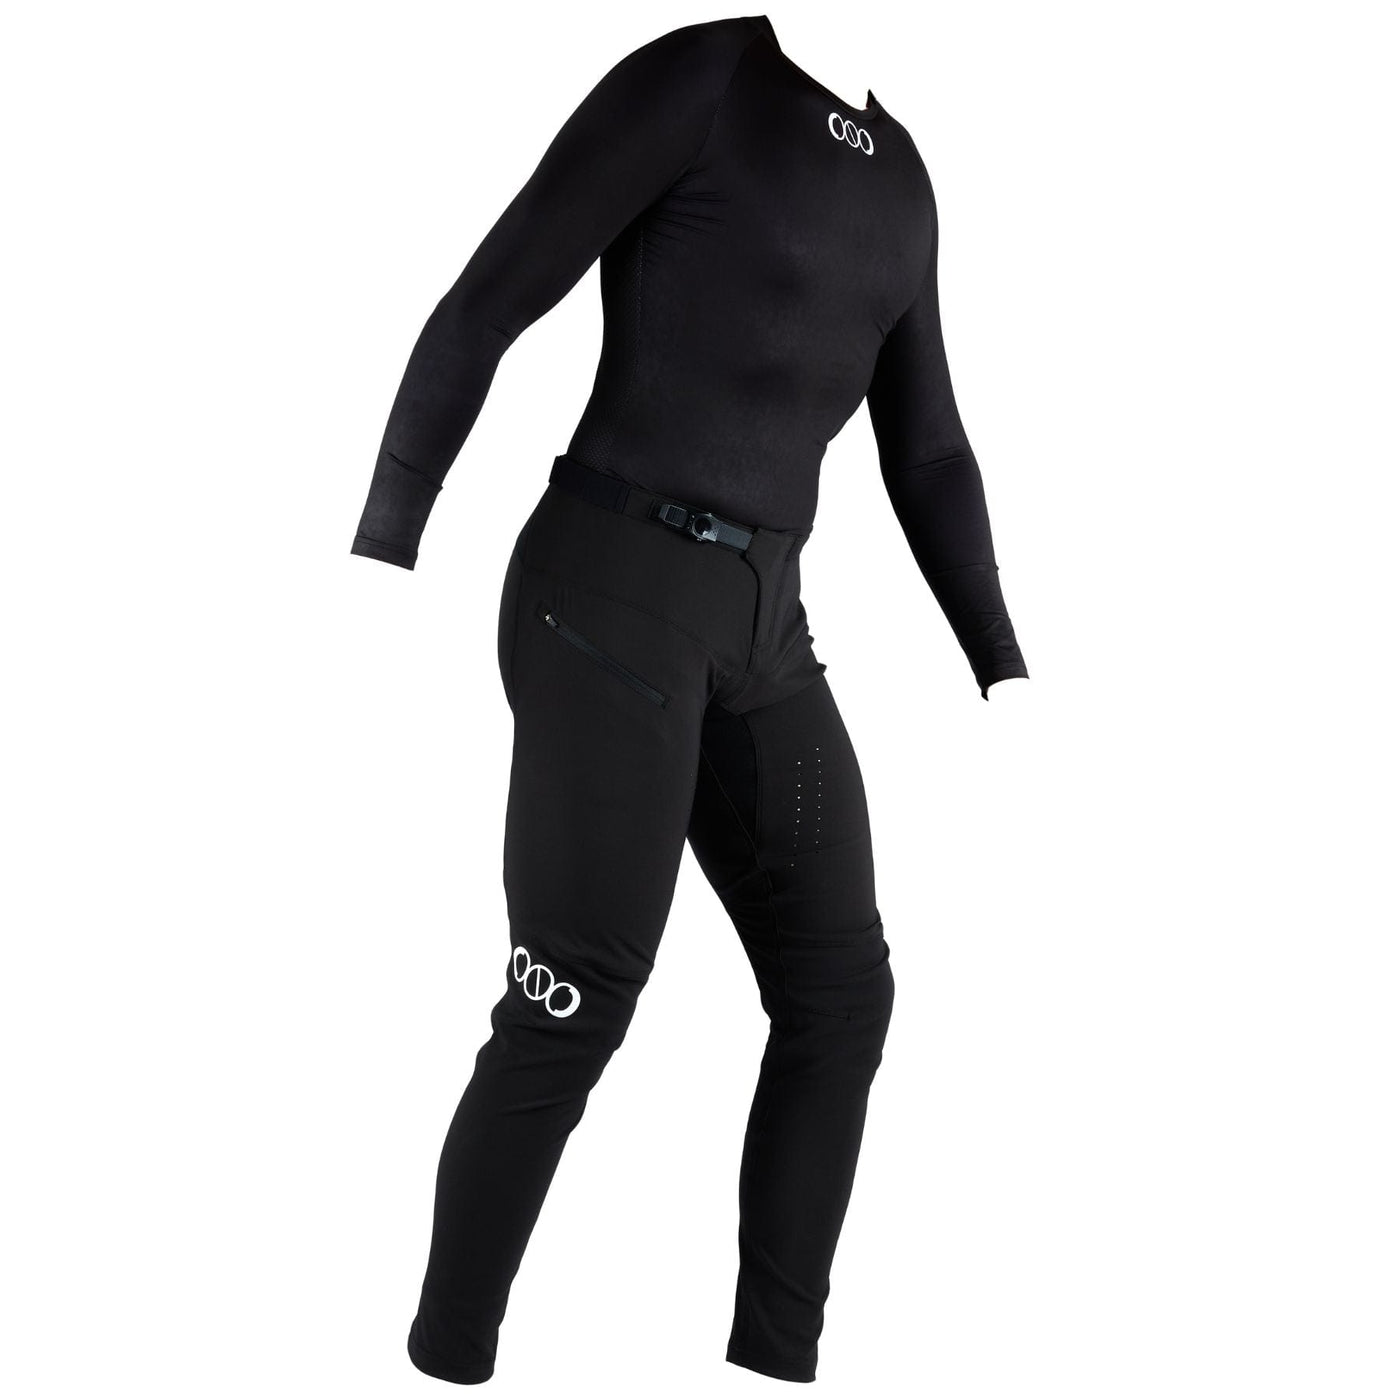 NoLogo Racer Adult Long Sleeve Cycling Jersey - Black